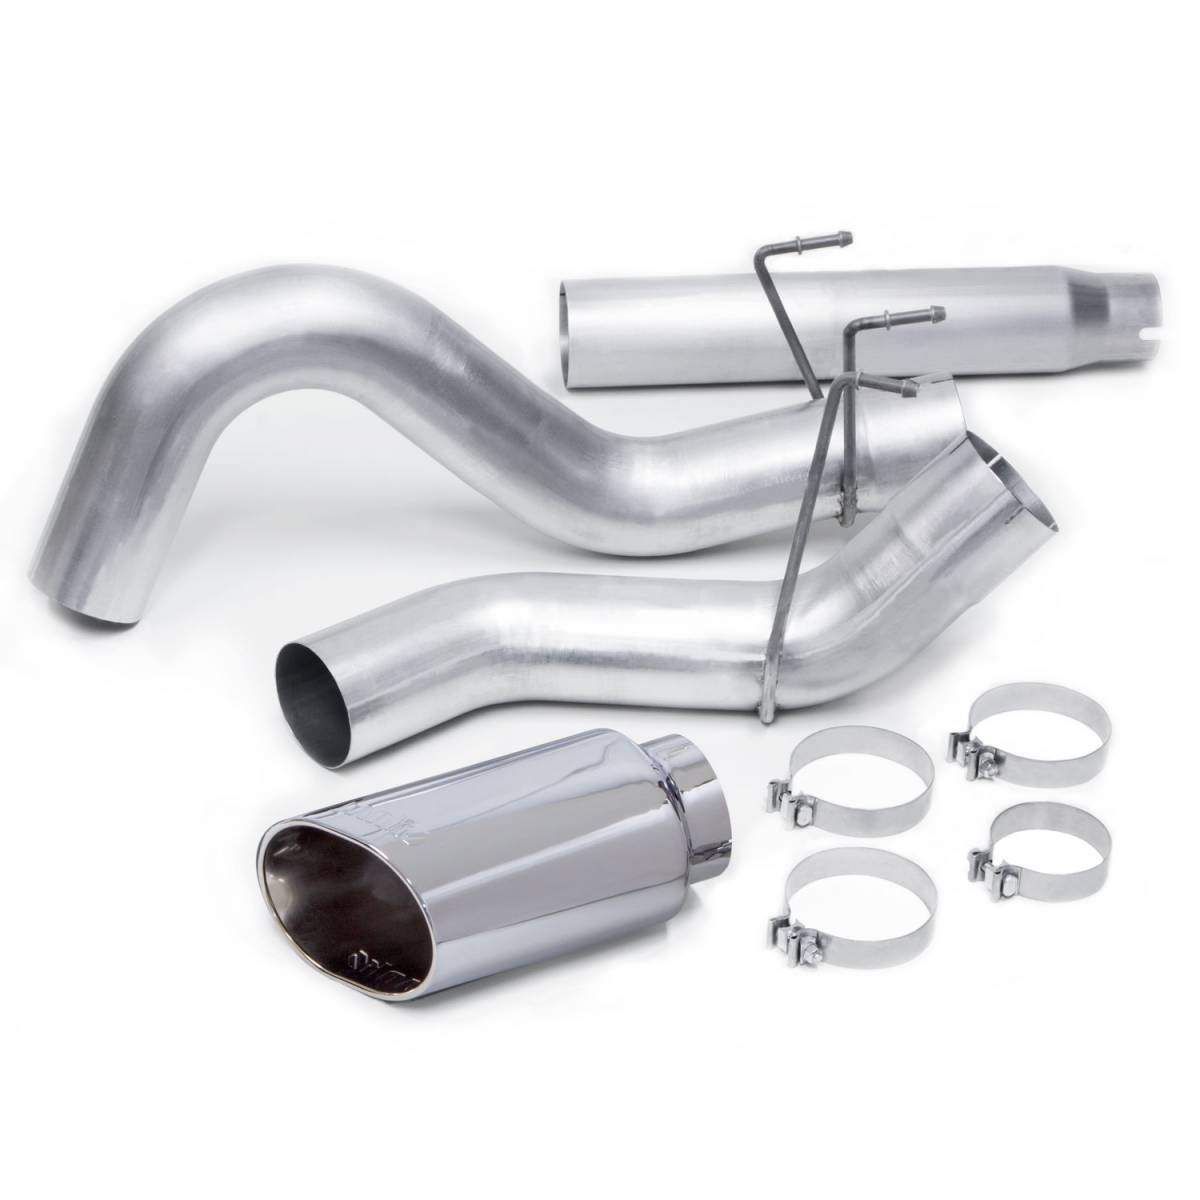 Banks Power #49779 Monster Exhaust System 5-inch Single S/S-Chrome Tip